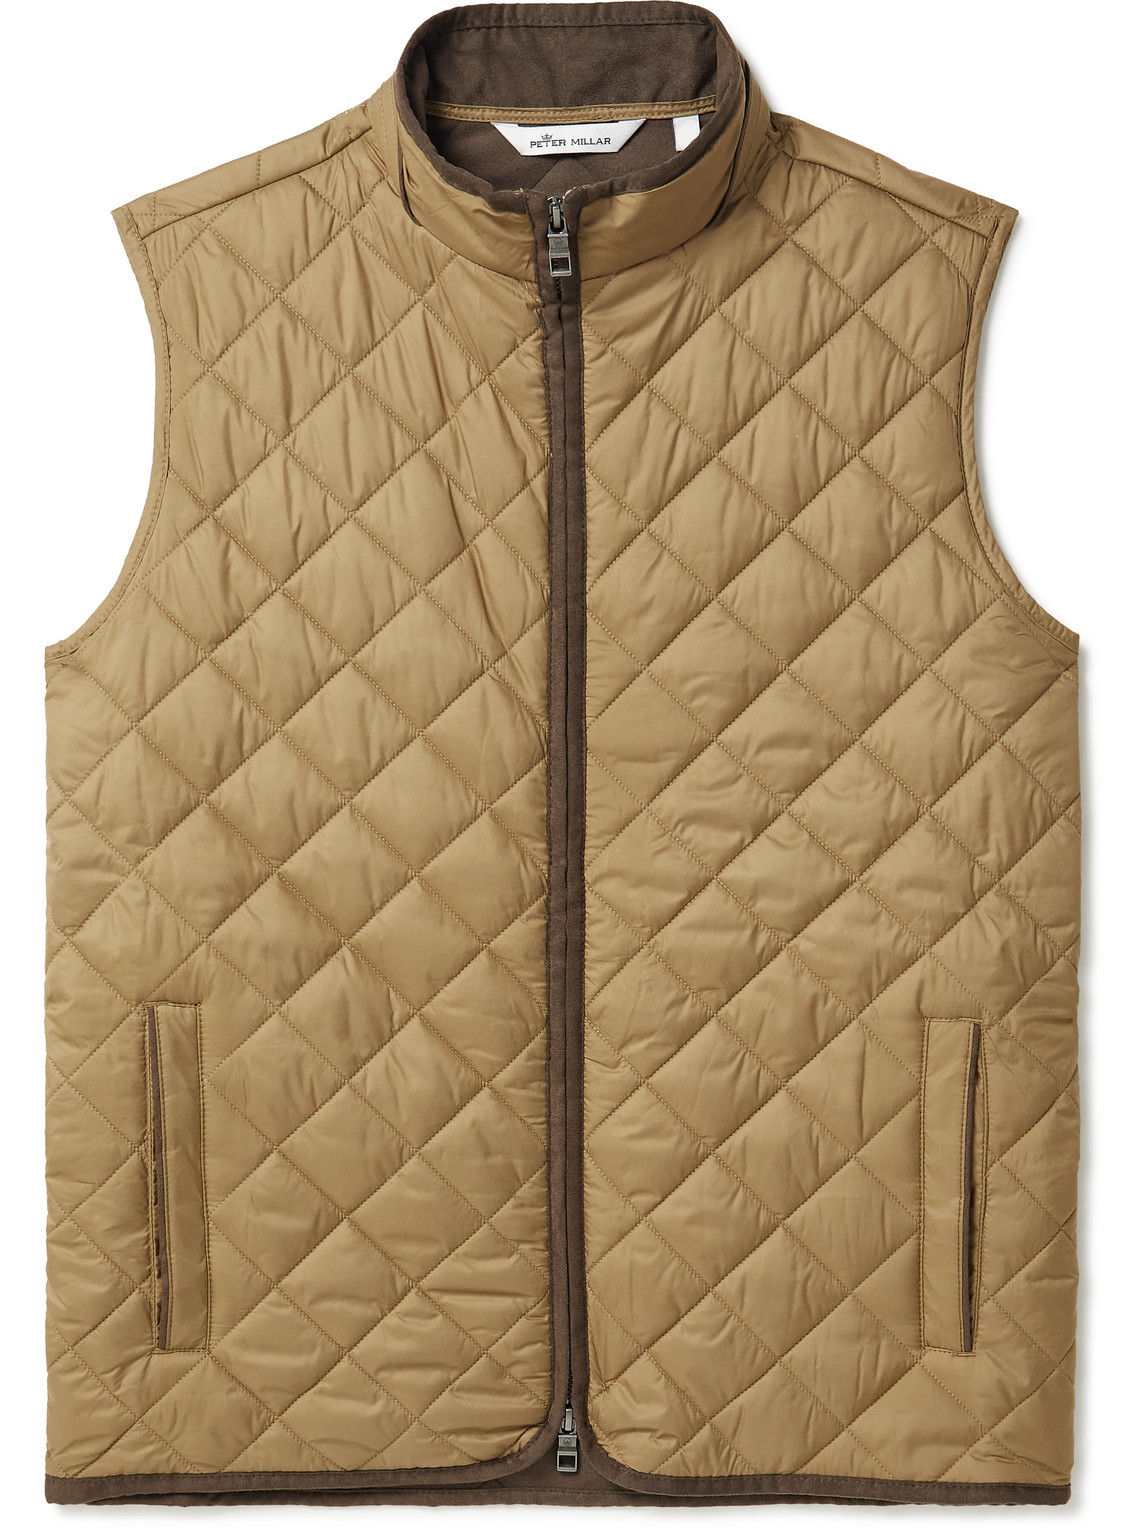 Peter Millar Essex Quilted Shell Gilet